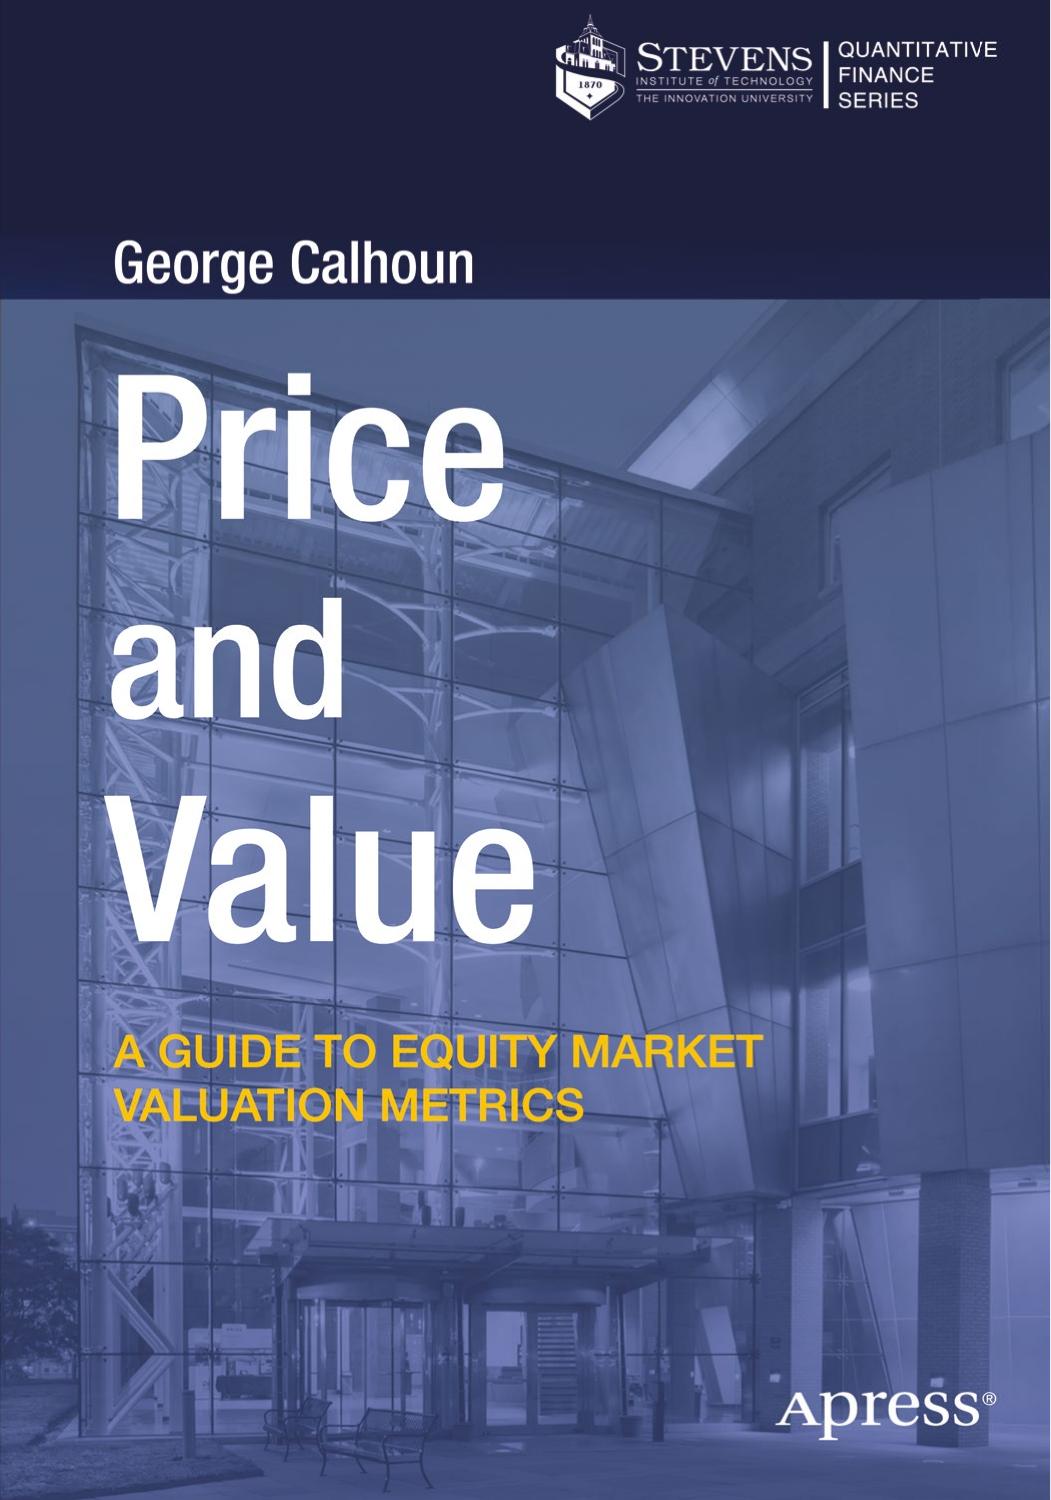 Price and Value: A Guide to Equity Market Valuation Metrics by George Calhoun